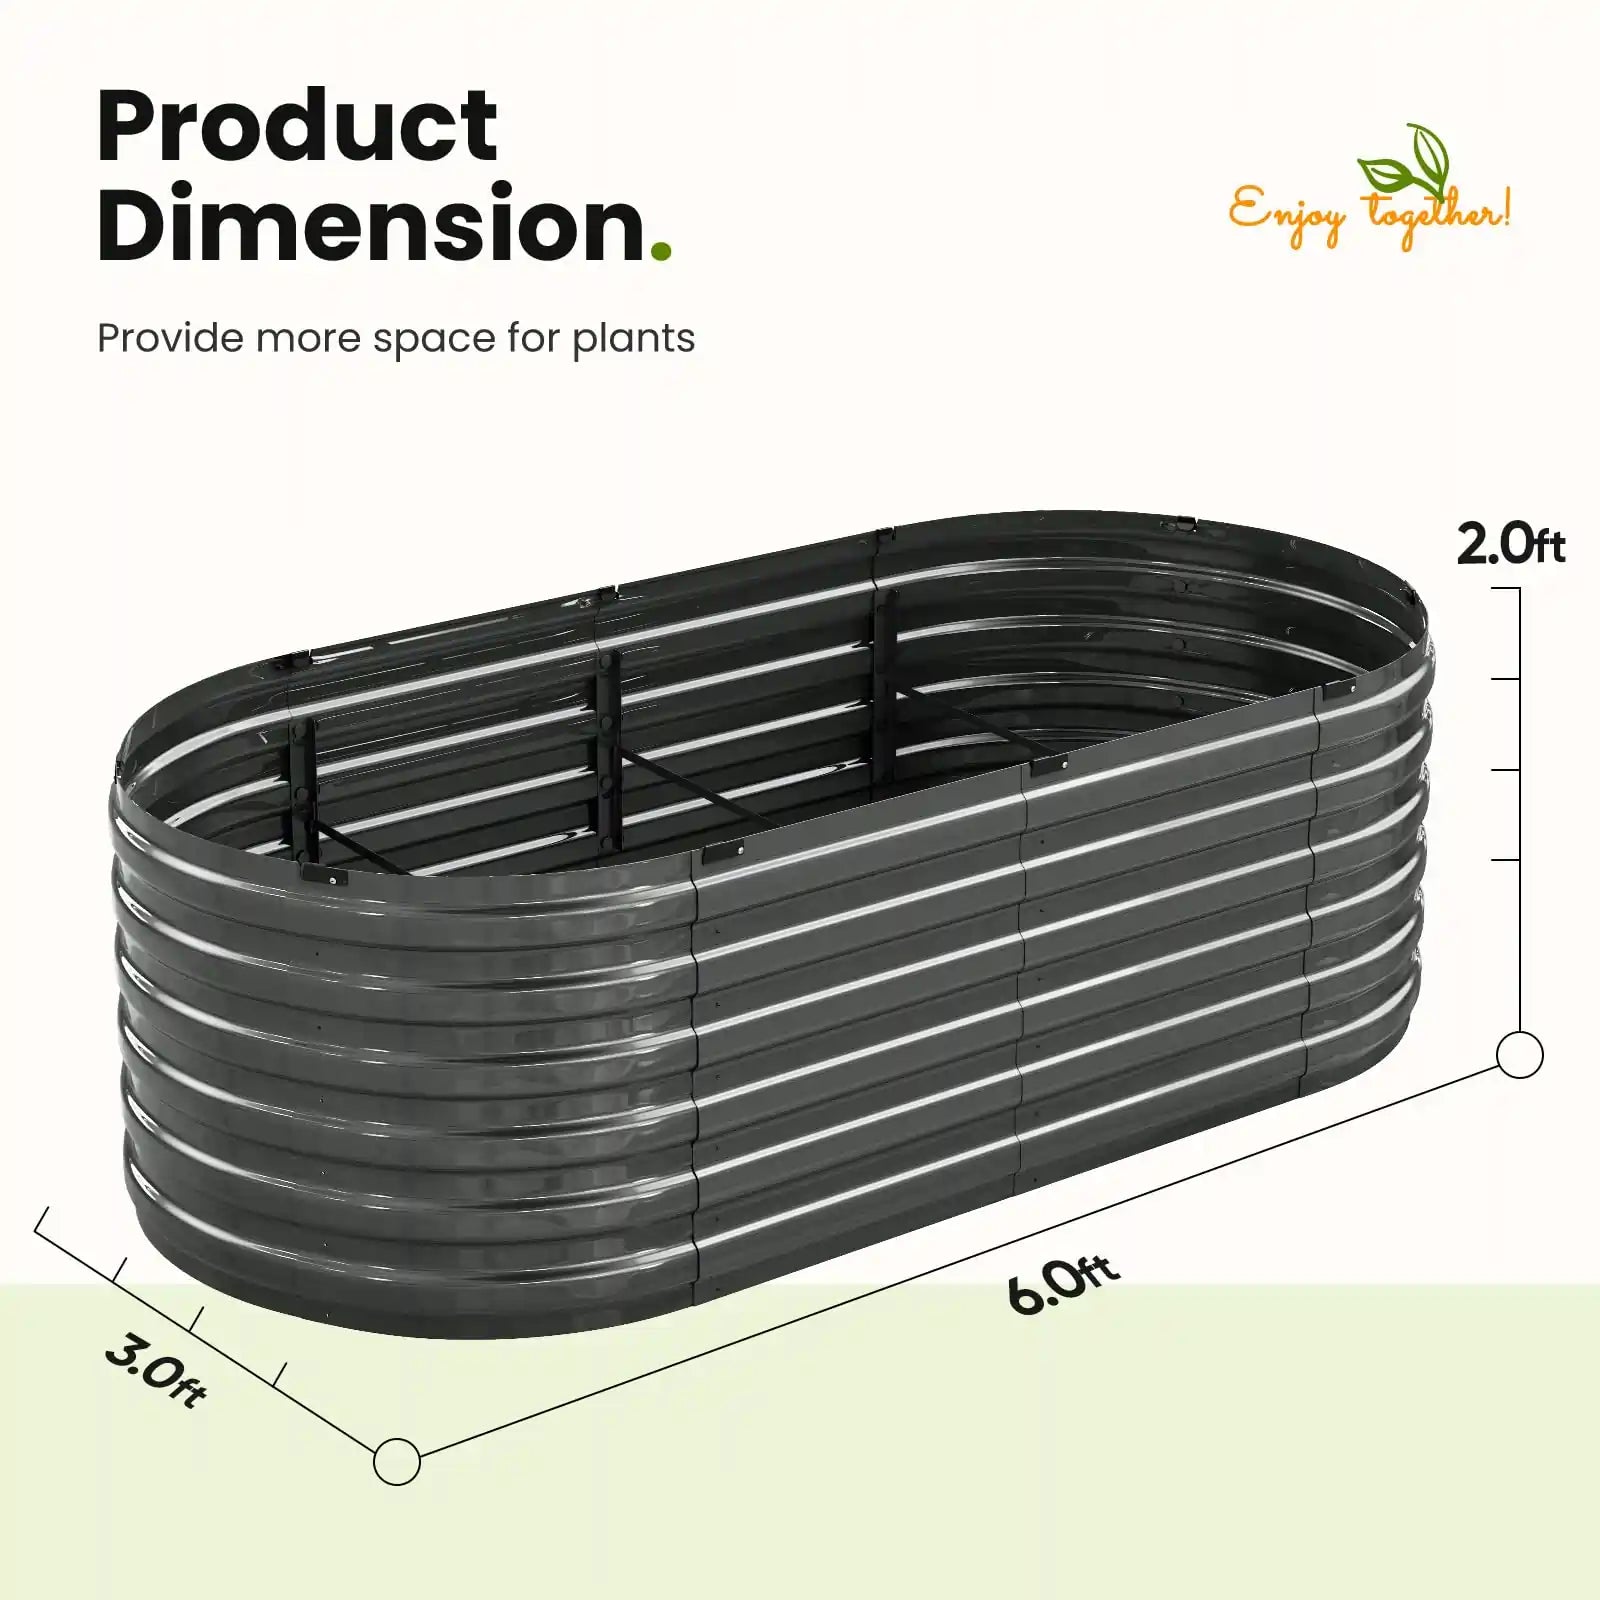 KING BIRD Screwless Raised Garden Bed 6x3x2ft product dimension#size_6x3x2ft